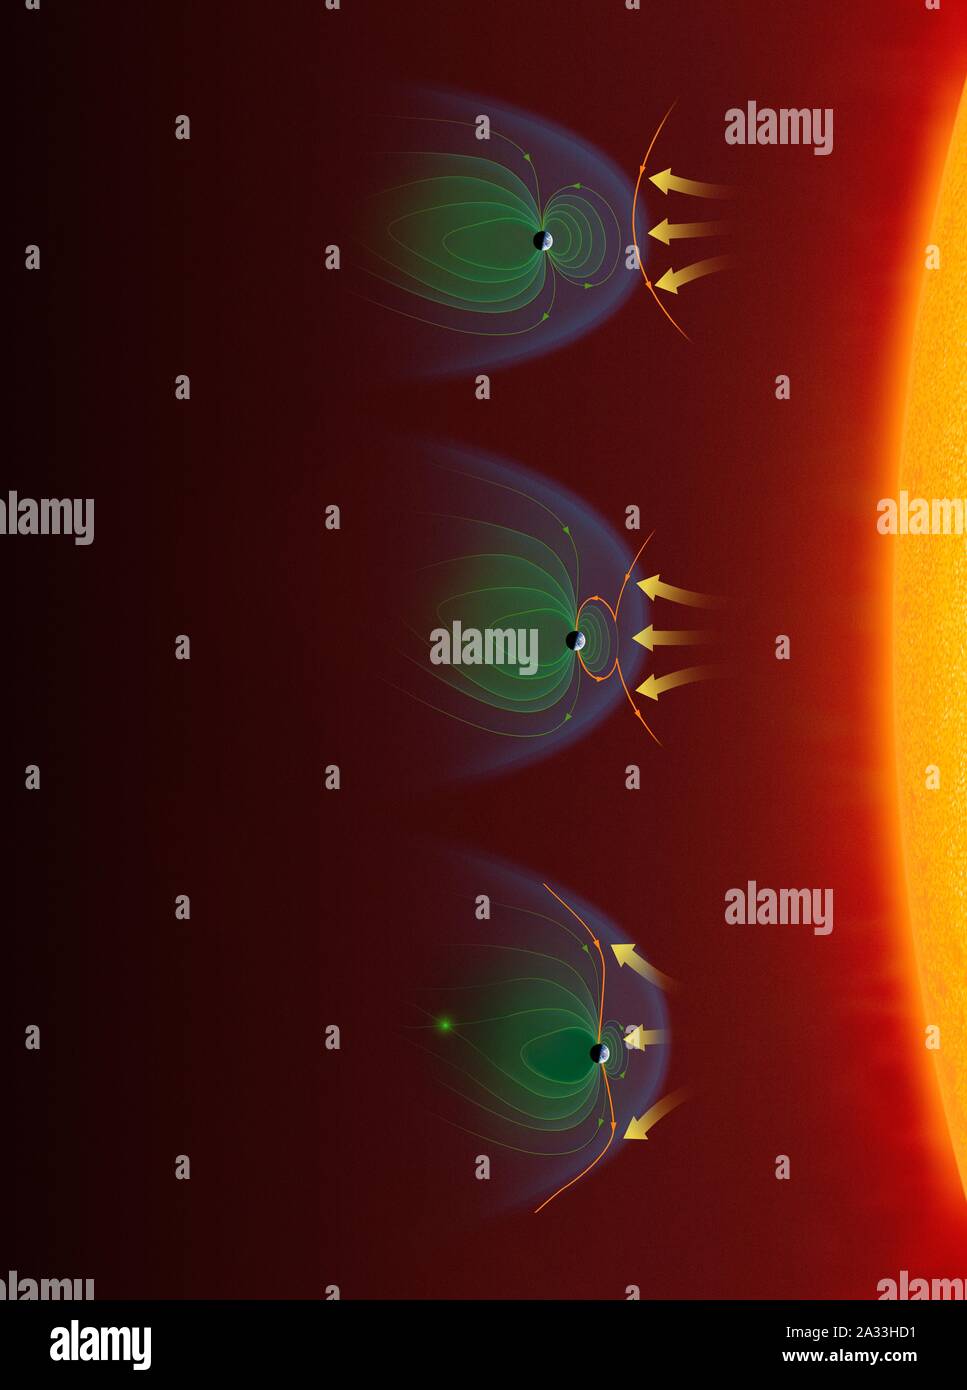 Coronal mass ejection and magnetosphere, illustration Stock Photo